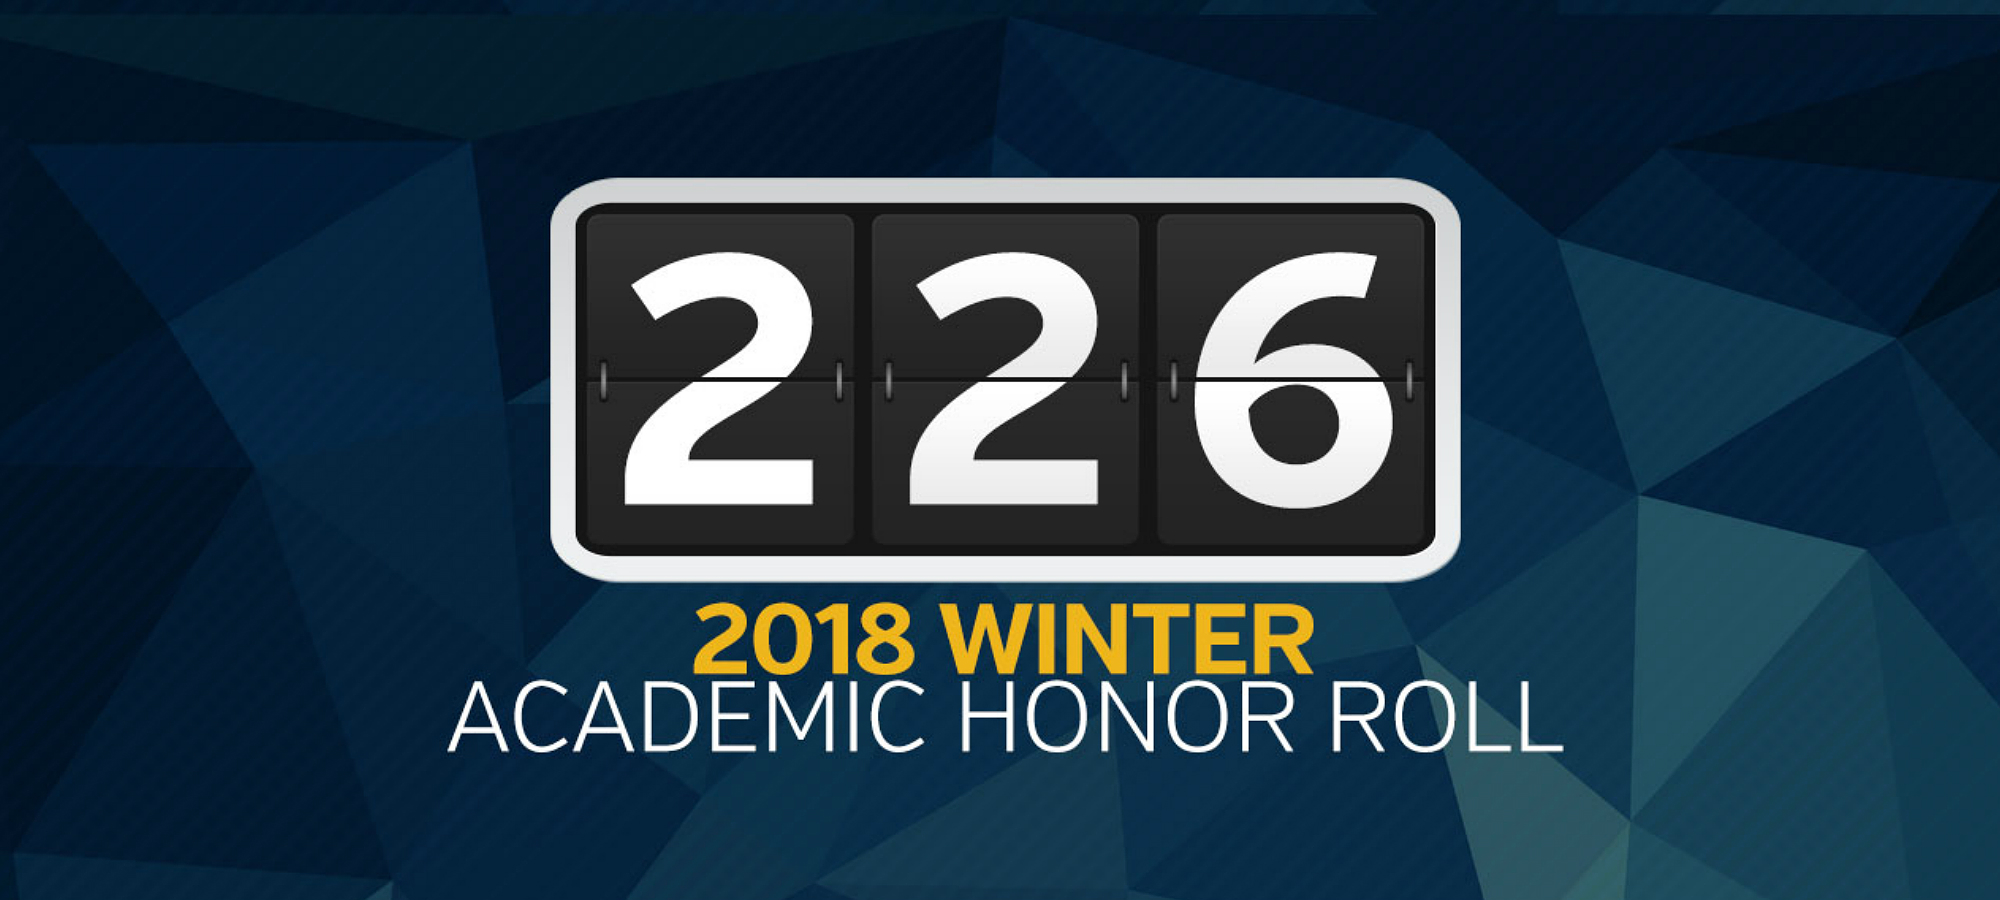 UD Basketball Student-Athletes Named to SCAC Winter Academic Honor Roll